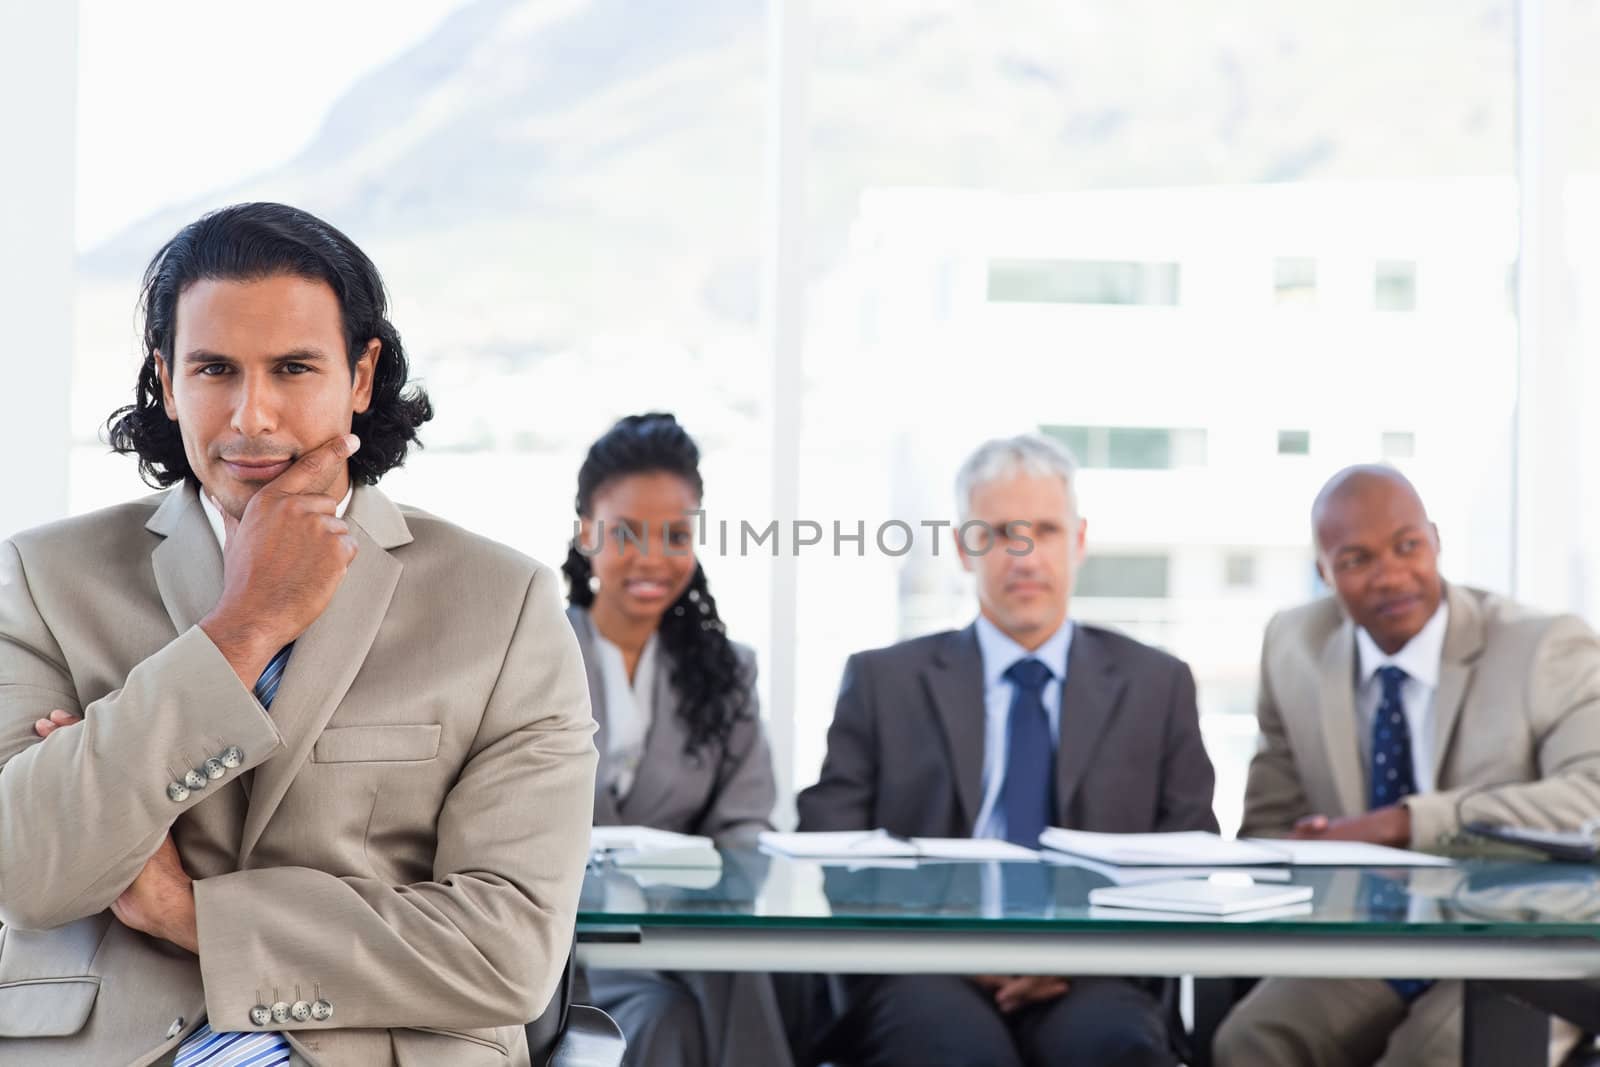 Stern businessman with his hand on his chin sitting in front of his business team